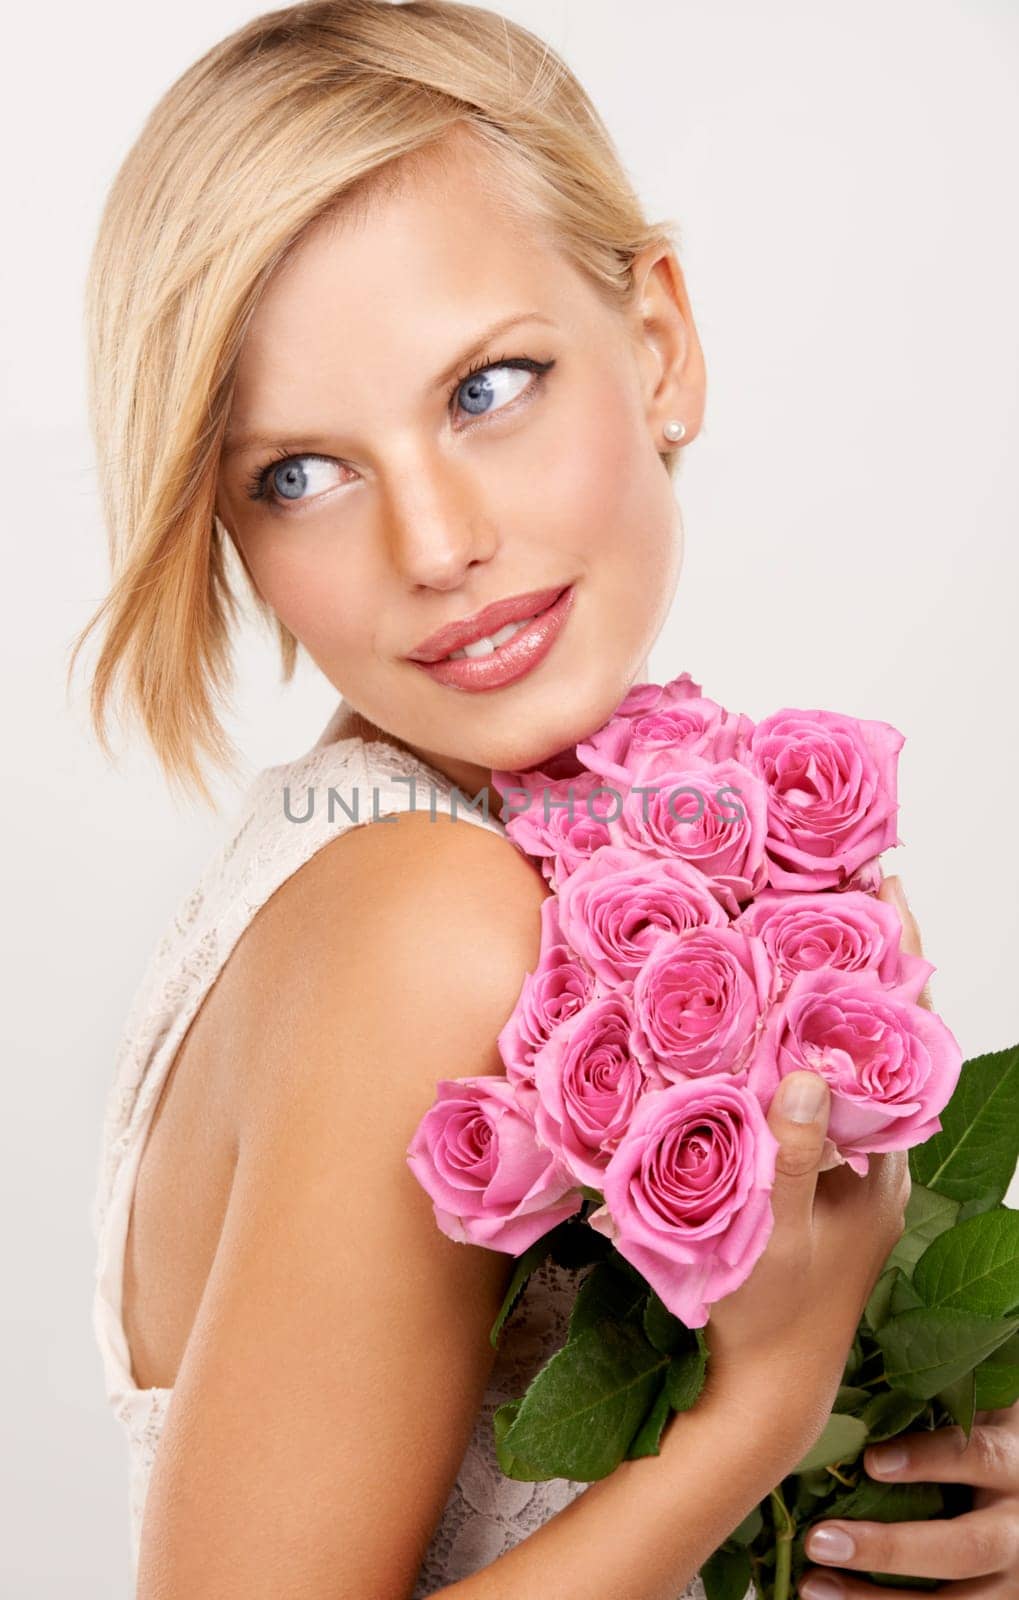 Flowers, bouquet and rose with woman in studio for floral, valentines day and romance gift. Plants, beauty and happy with face of female person on white background for elegant, love and present by YuriArcurs